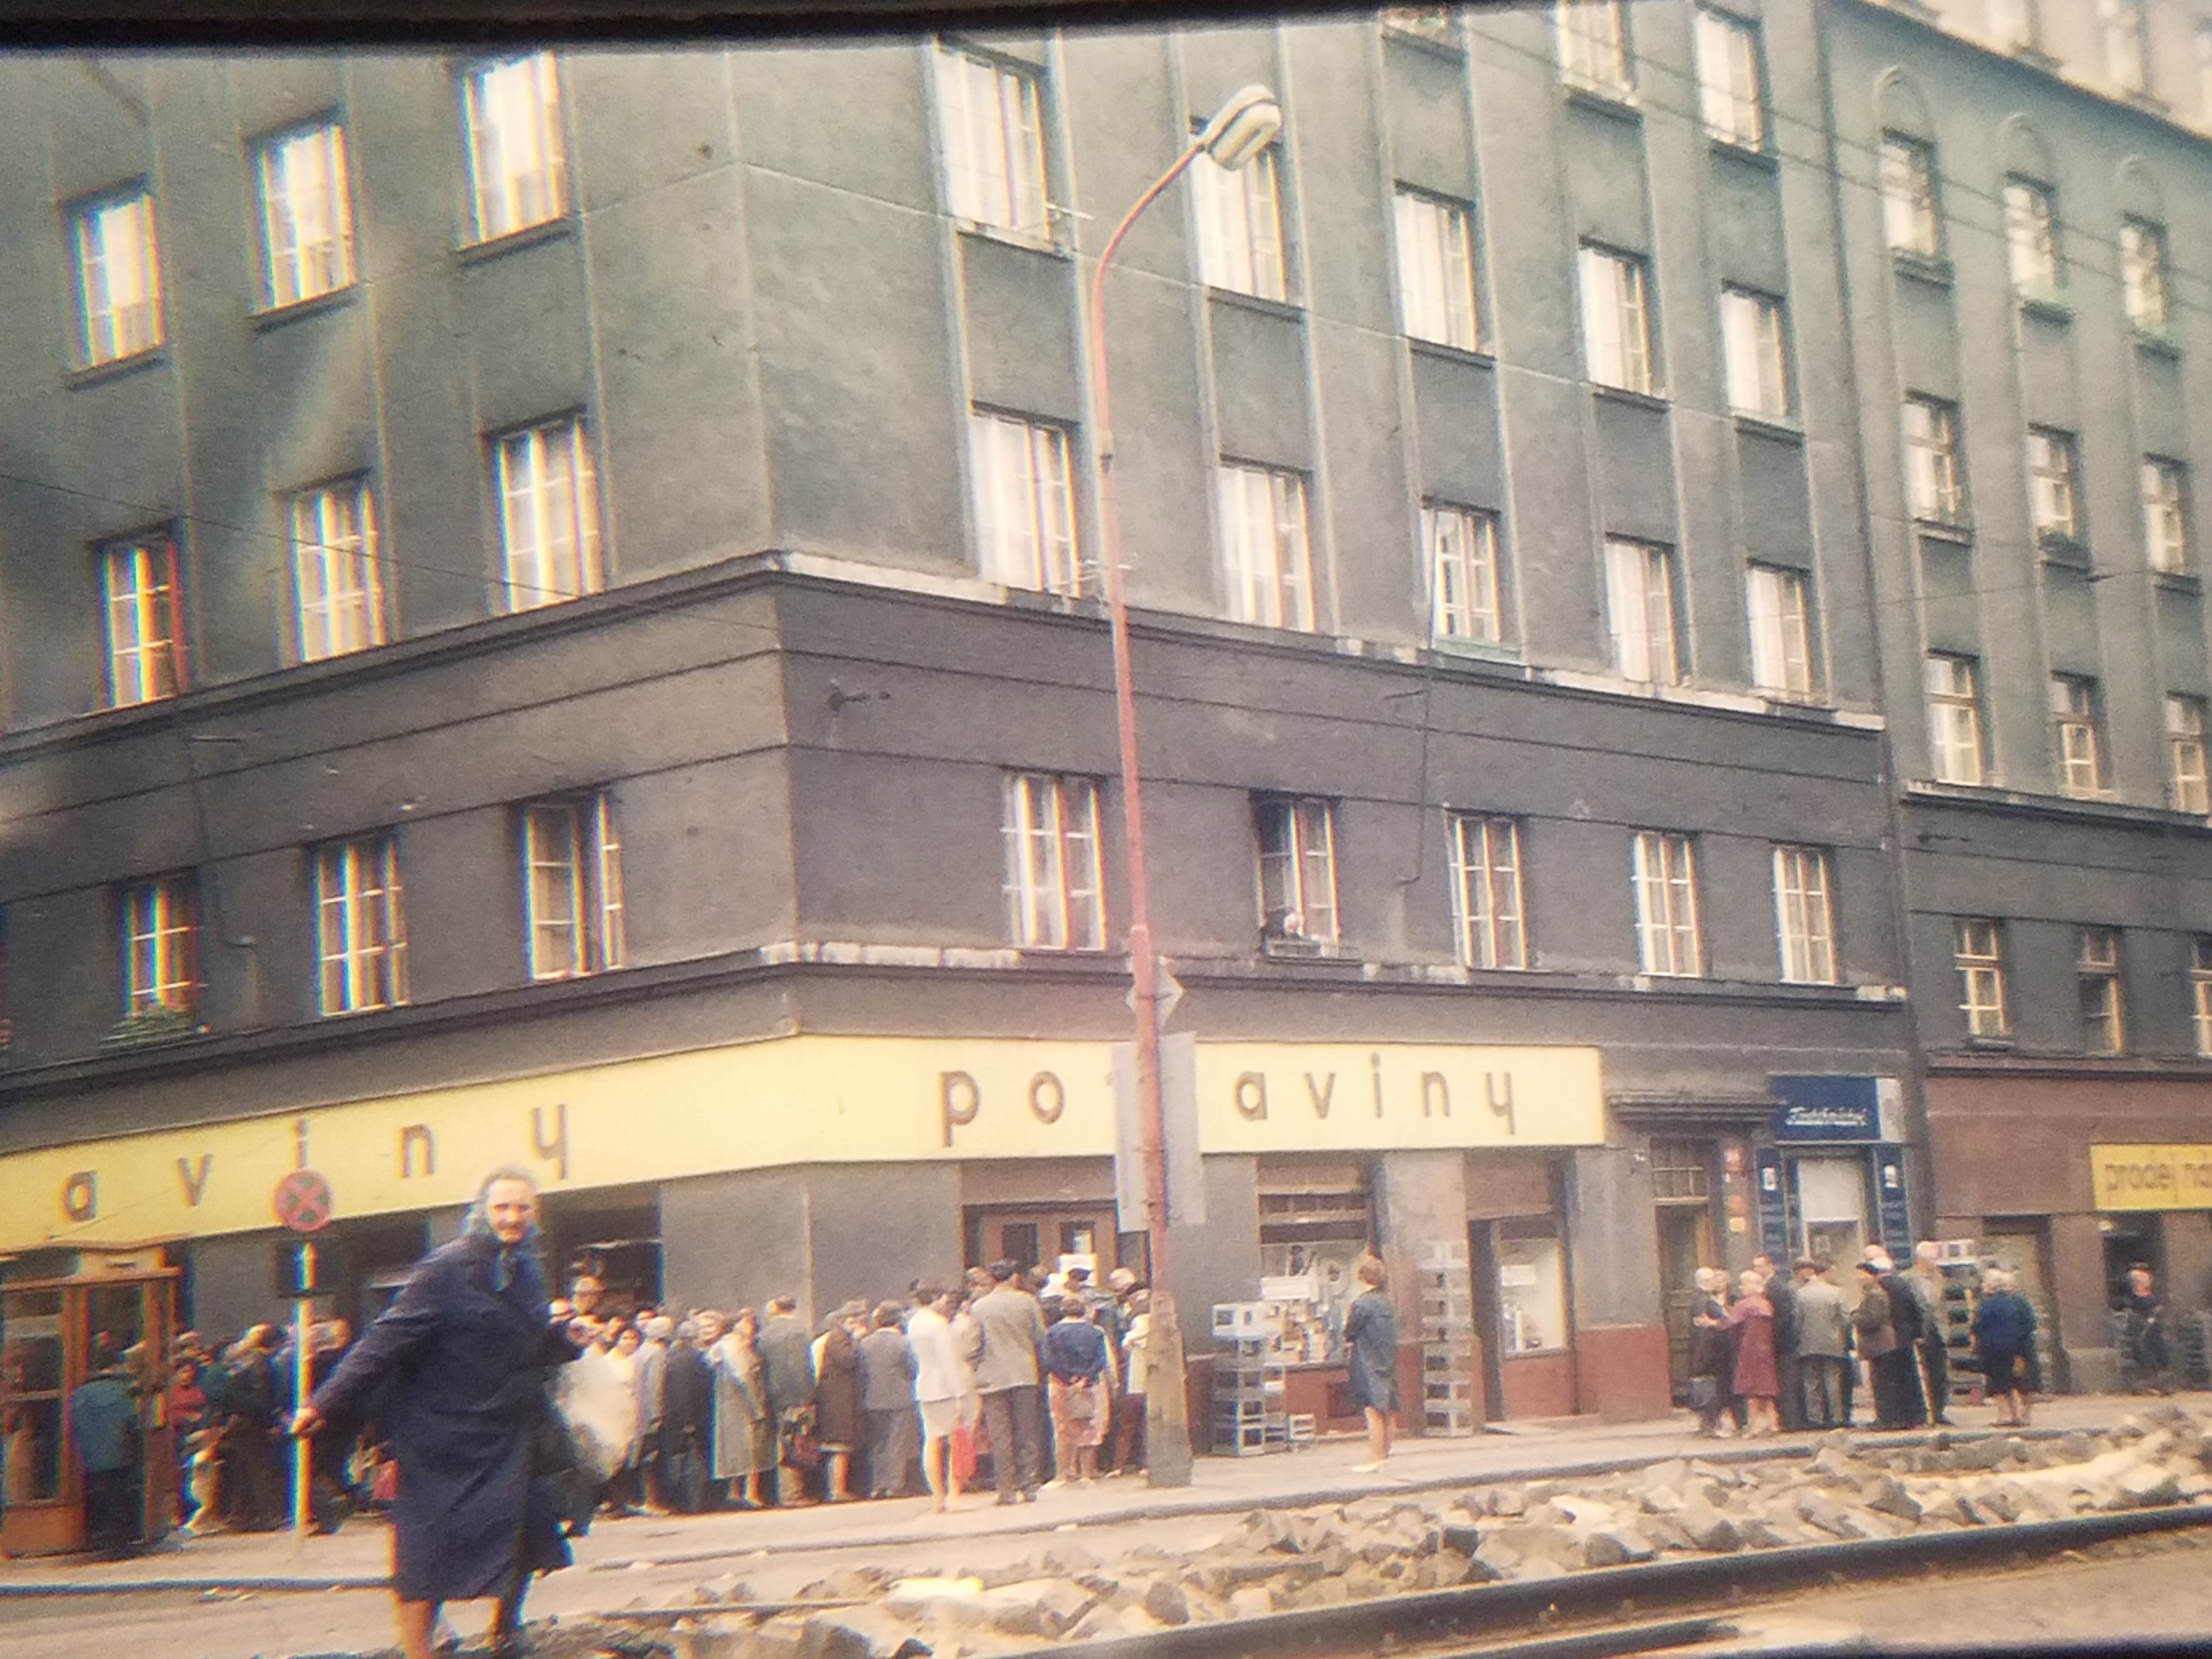 Lines in font of food store, Prague August 21, 1968